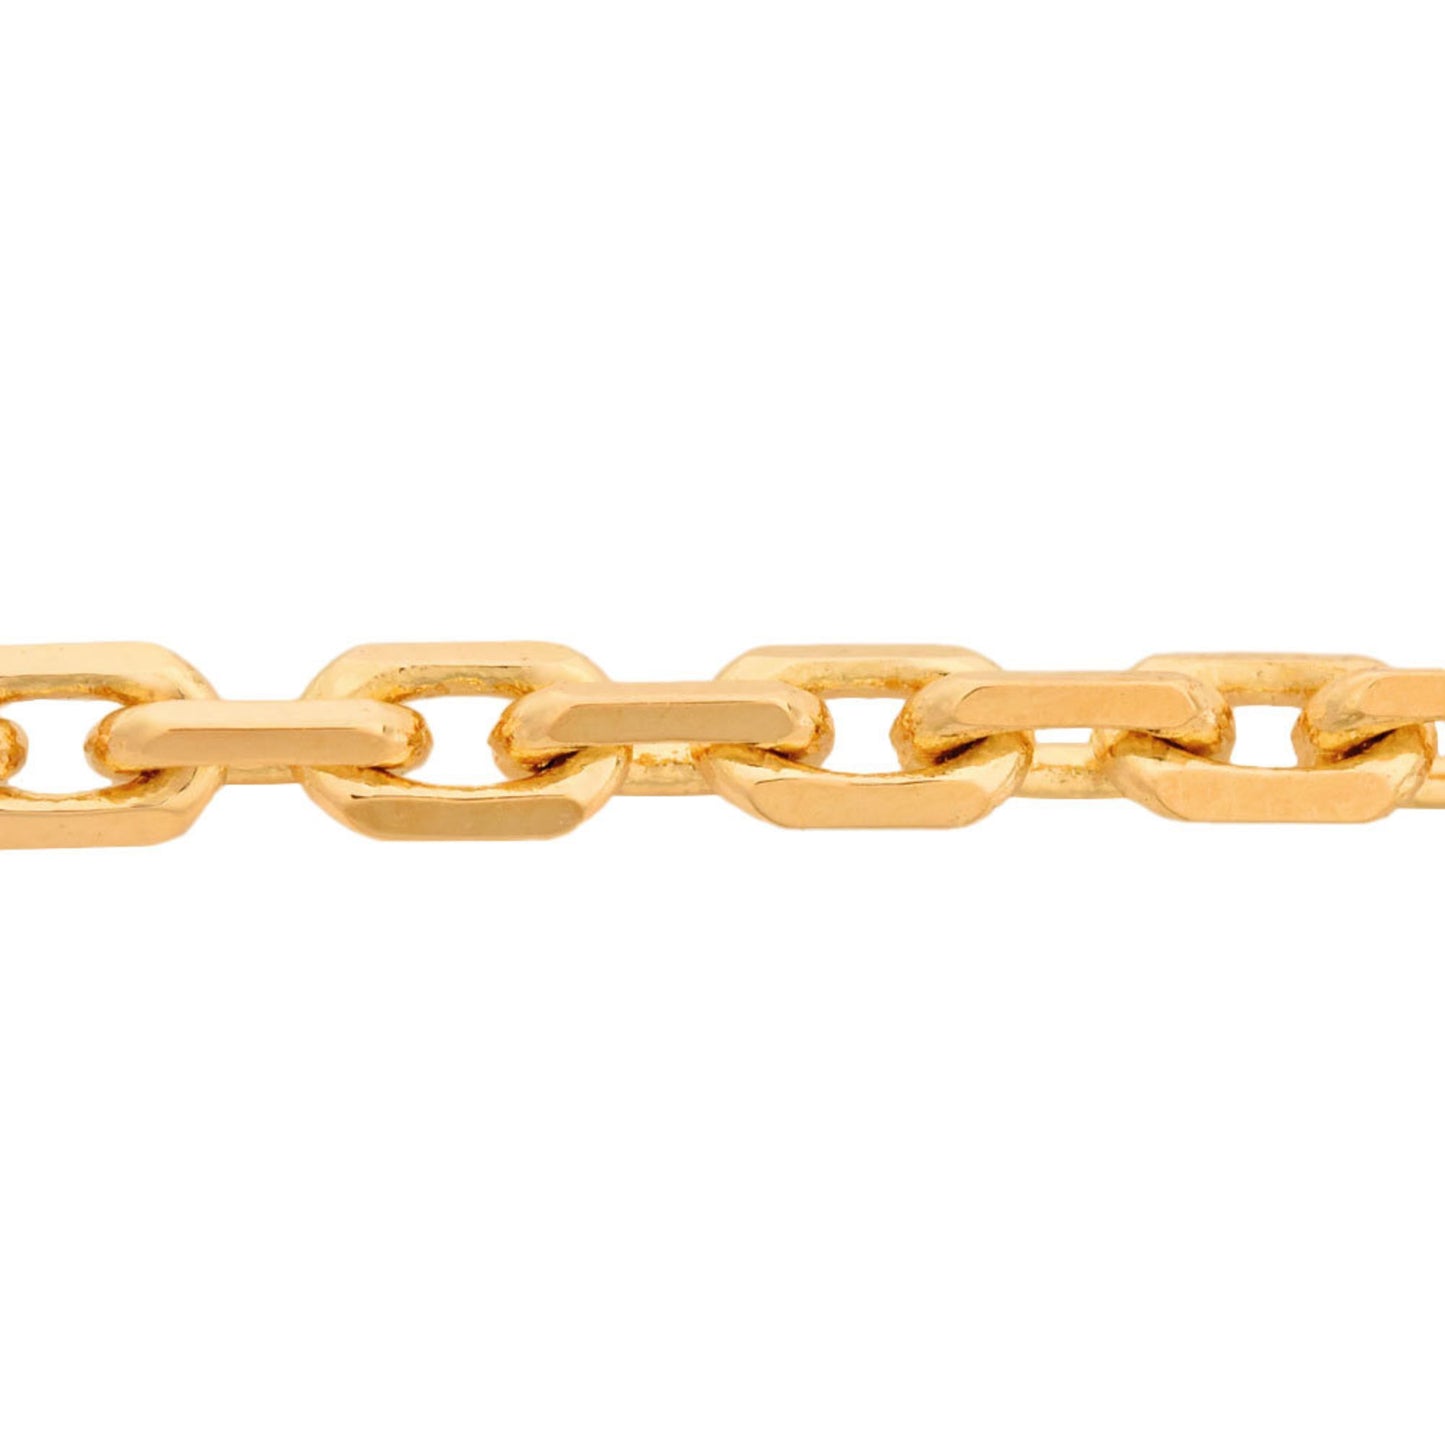 Cartier Women's 18K Yellow Gold Chain Necklace in Gold